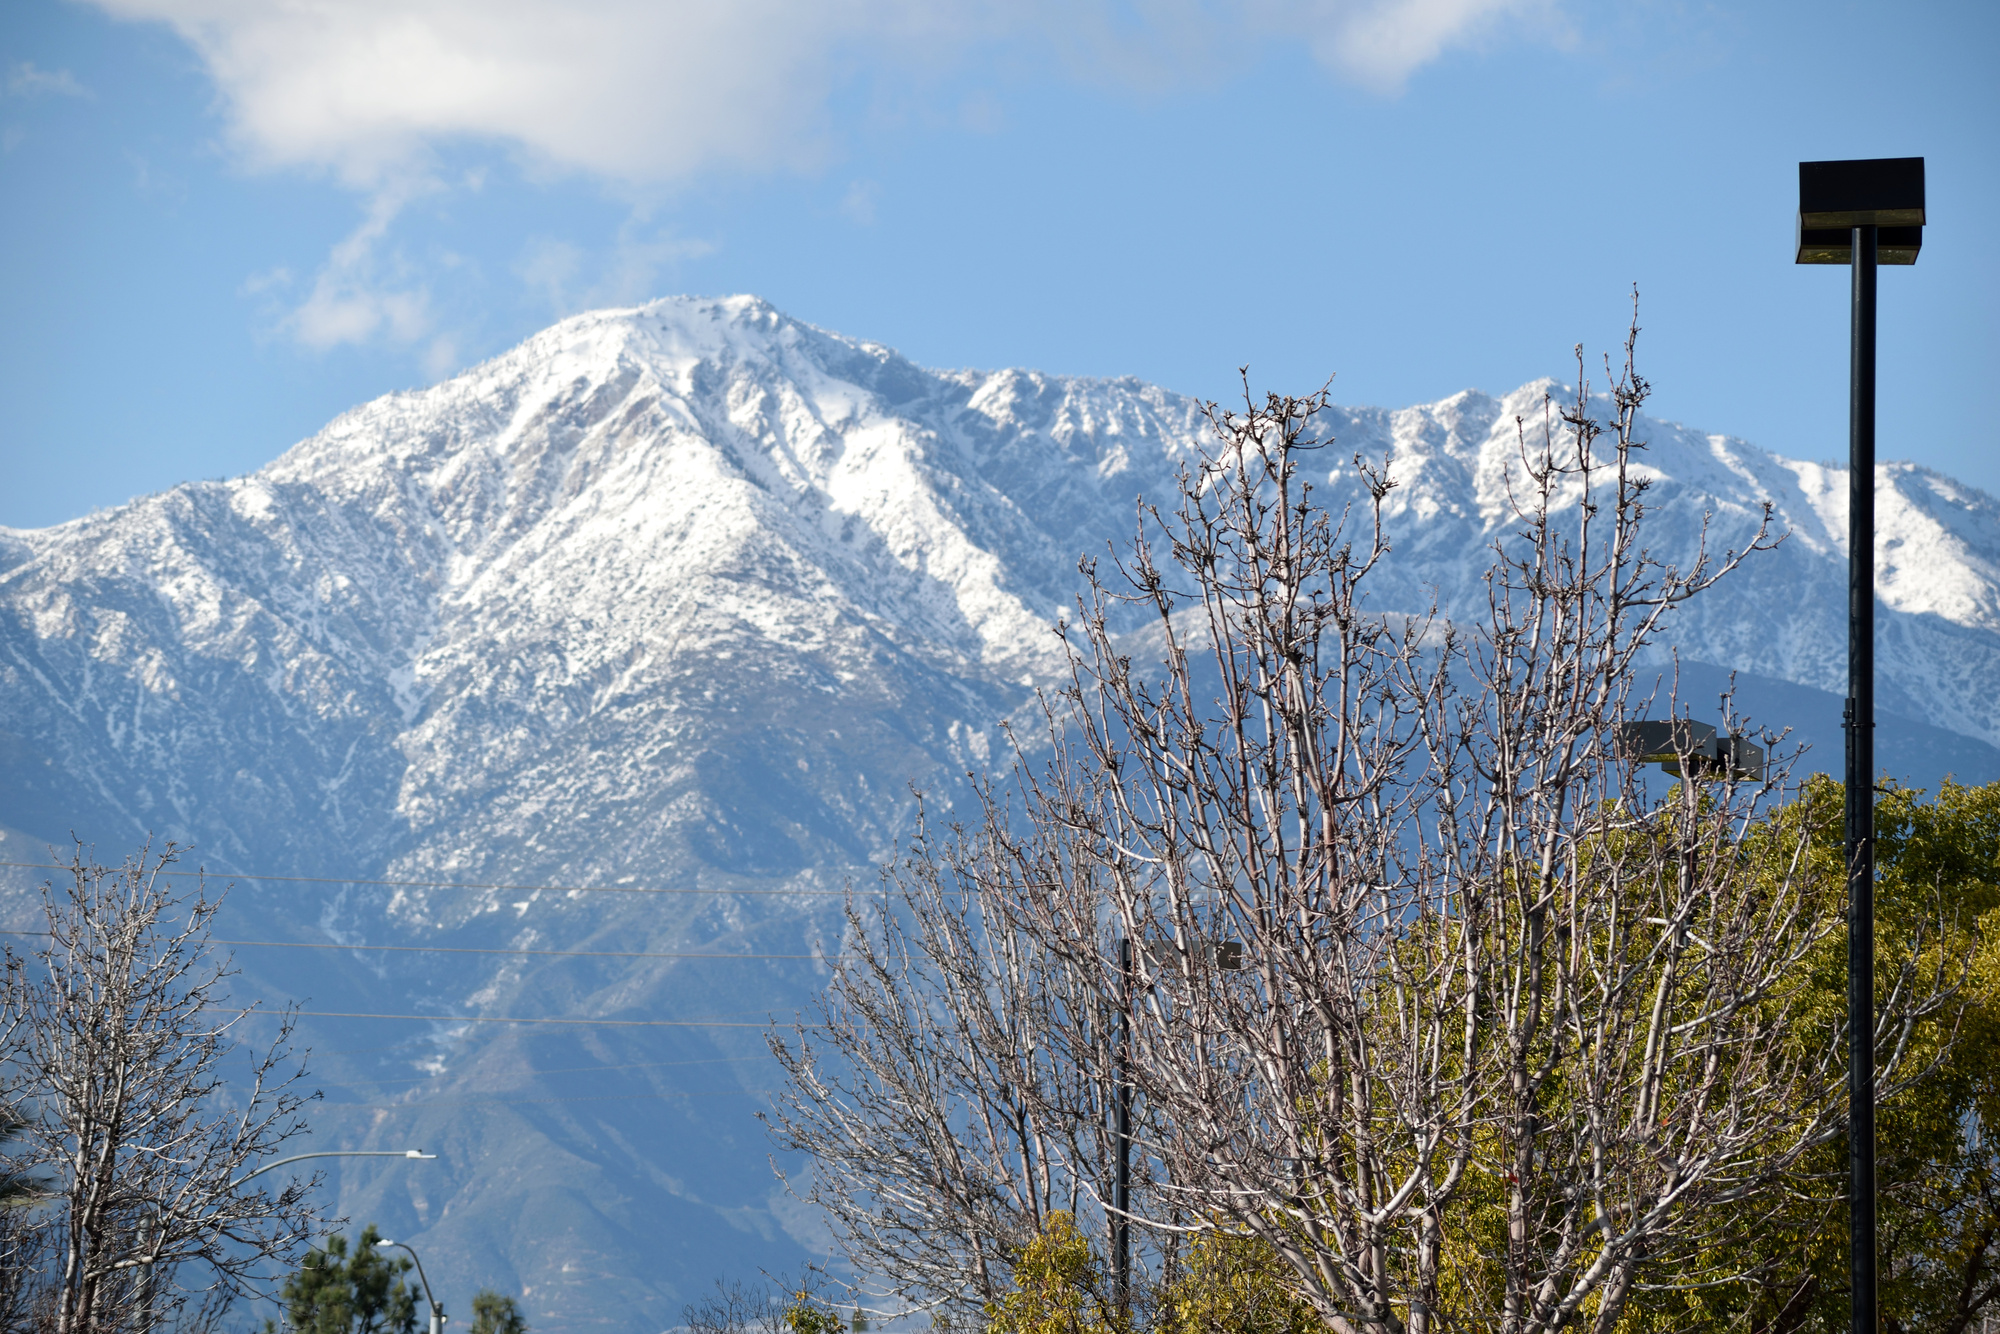 A Snowy Peak in the Inland Empire